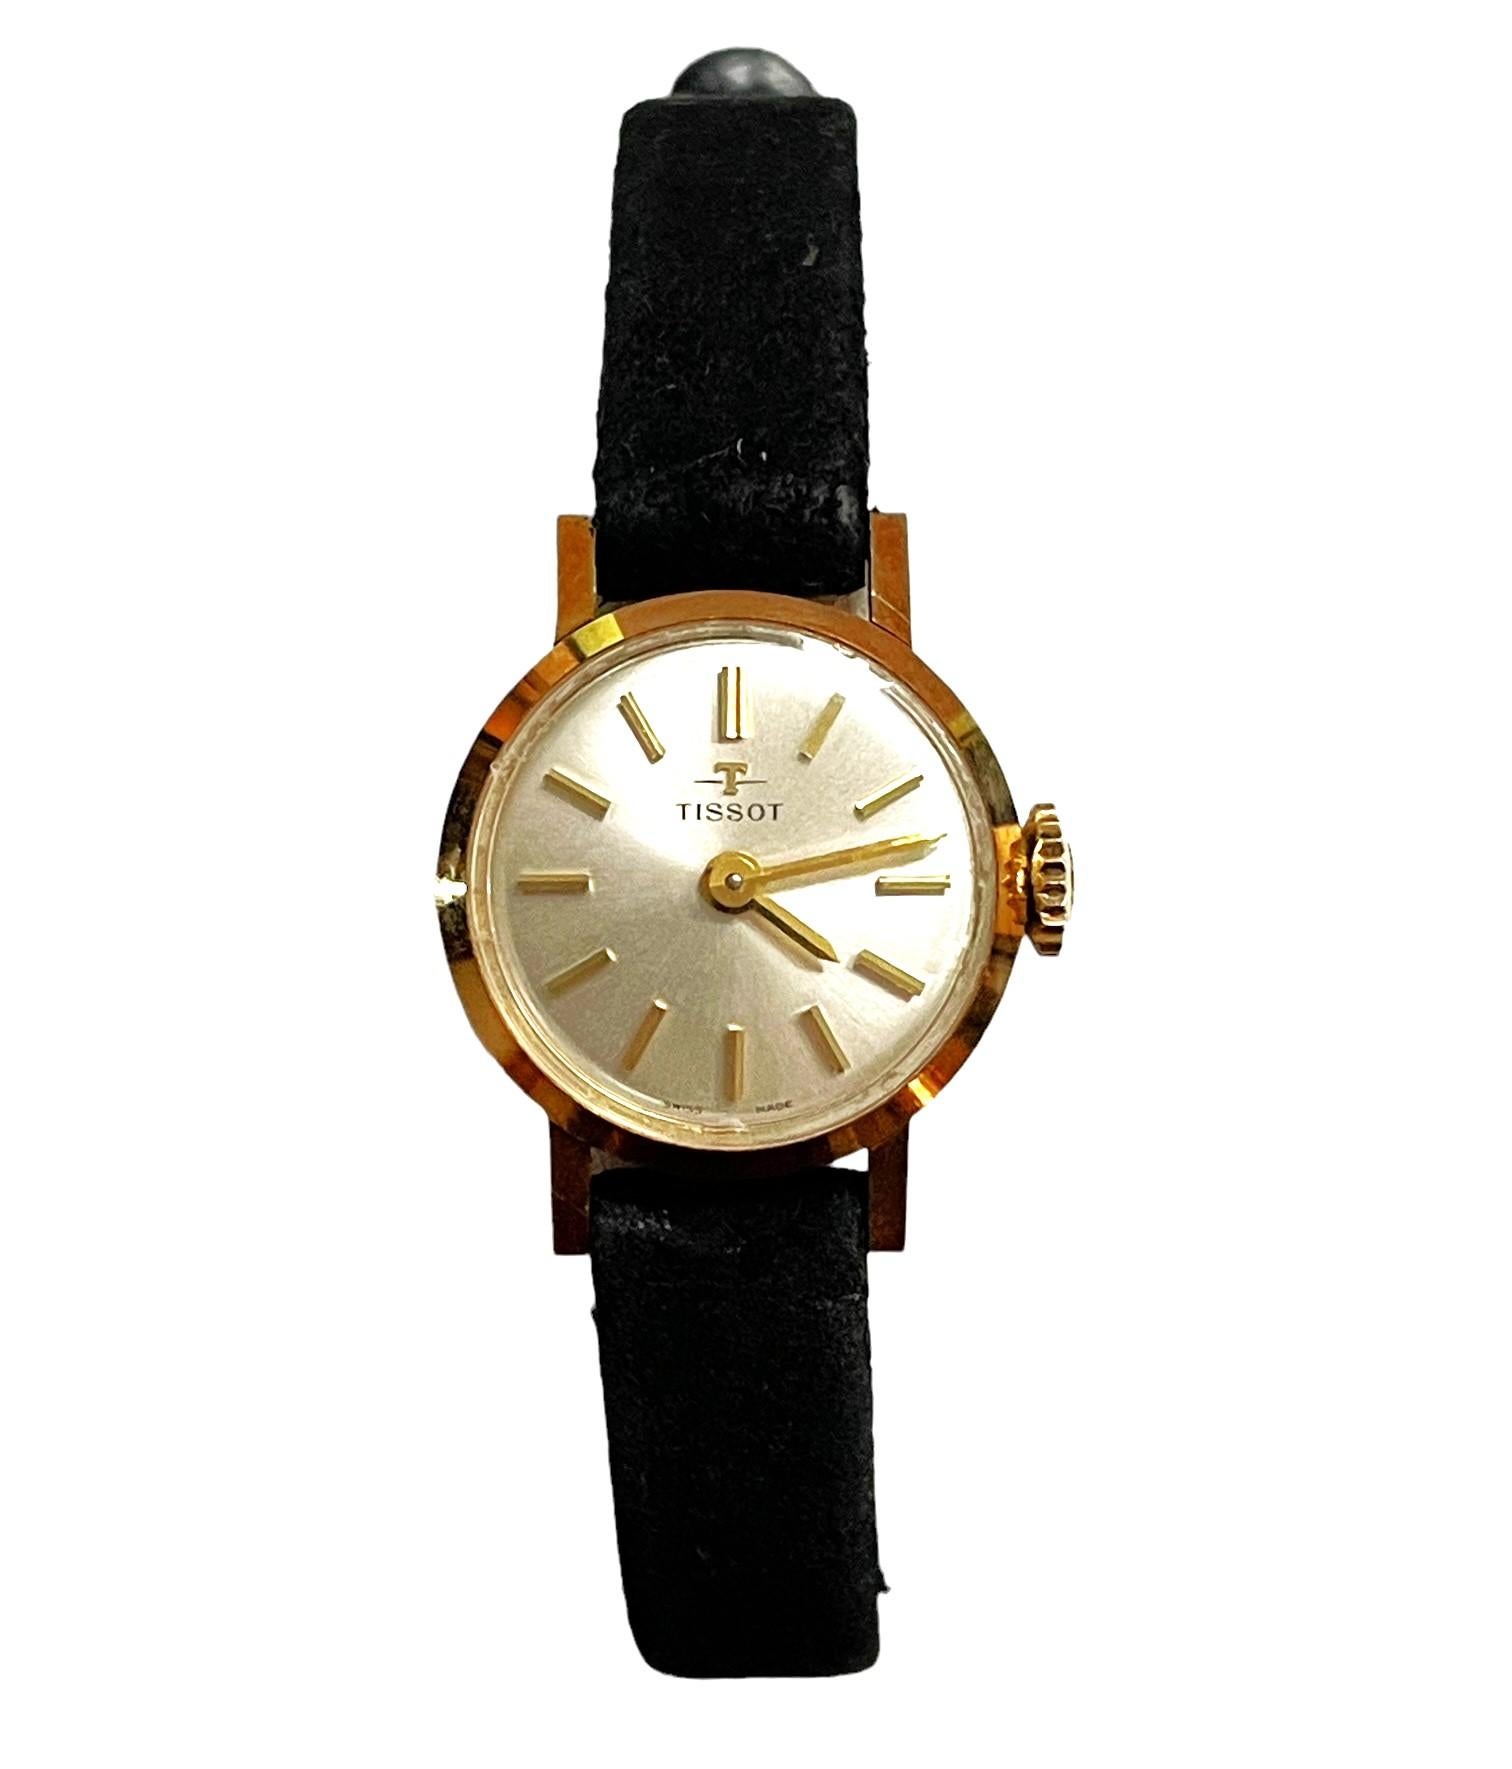 This is a Woman's 18k Yellow Gold Swiss 17 Jewel Manual Watch.  Watch has marks and scratches on back side from wear.  Overall the crystal is fully clear and watch winds and runs as it should.   Features 18k Yellow Gold Case and a black suede band